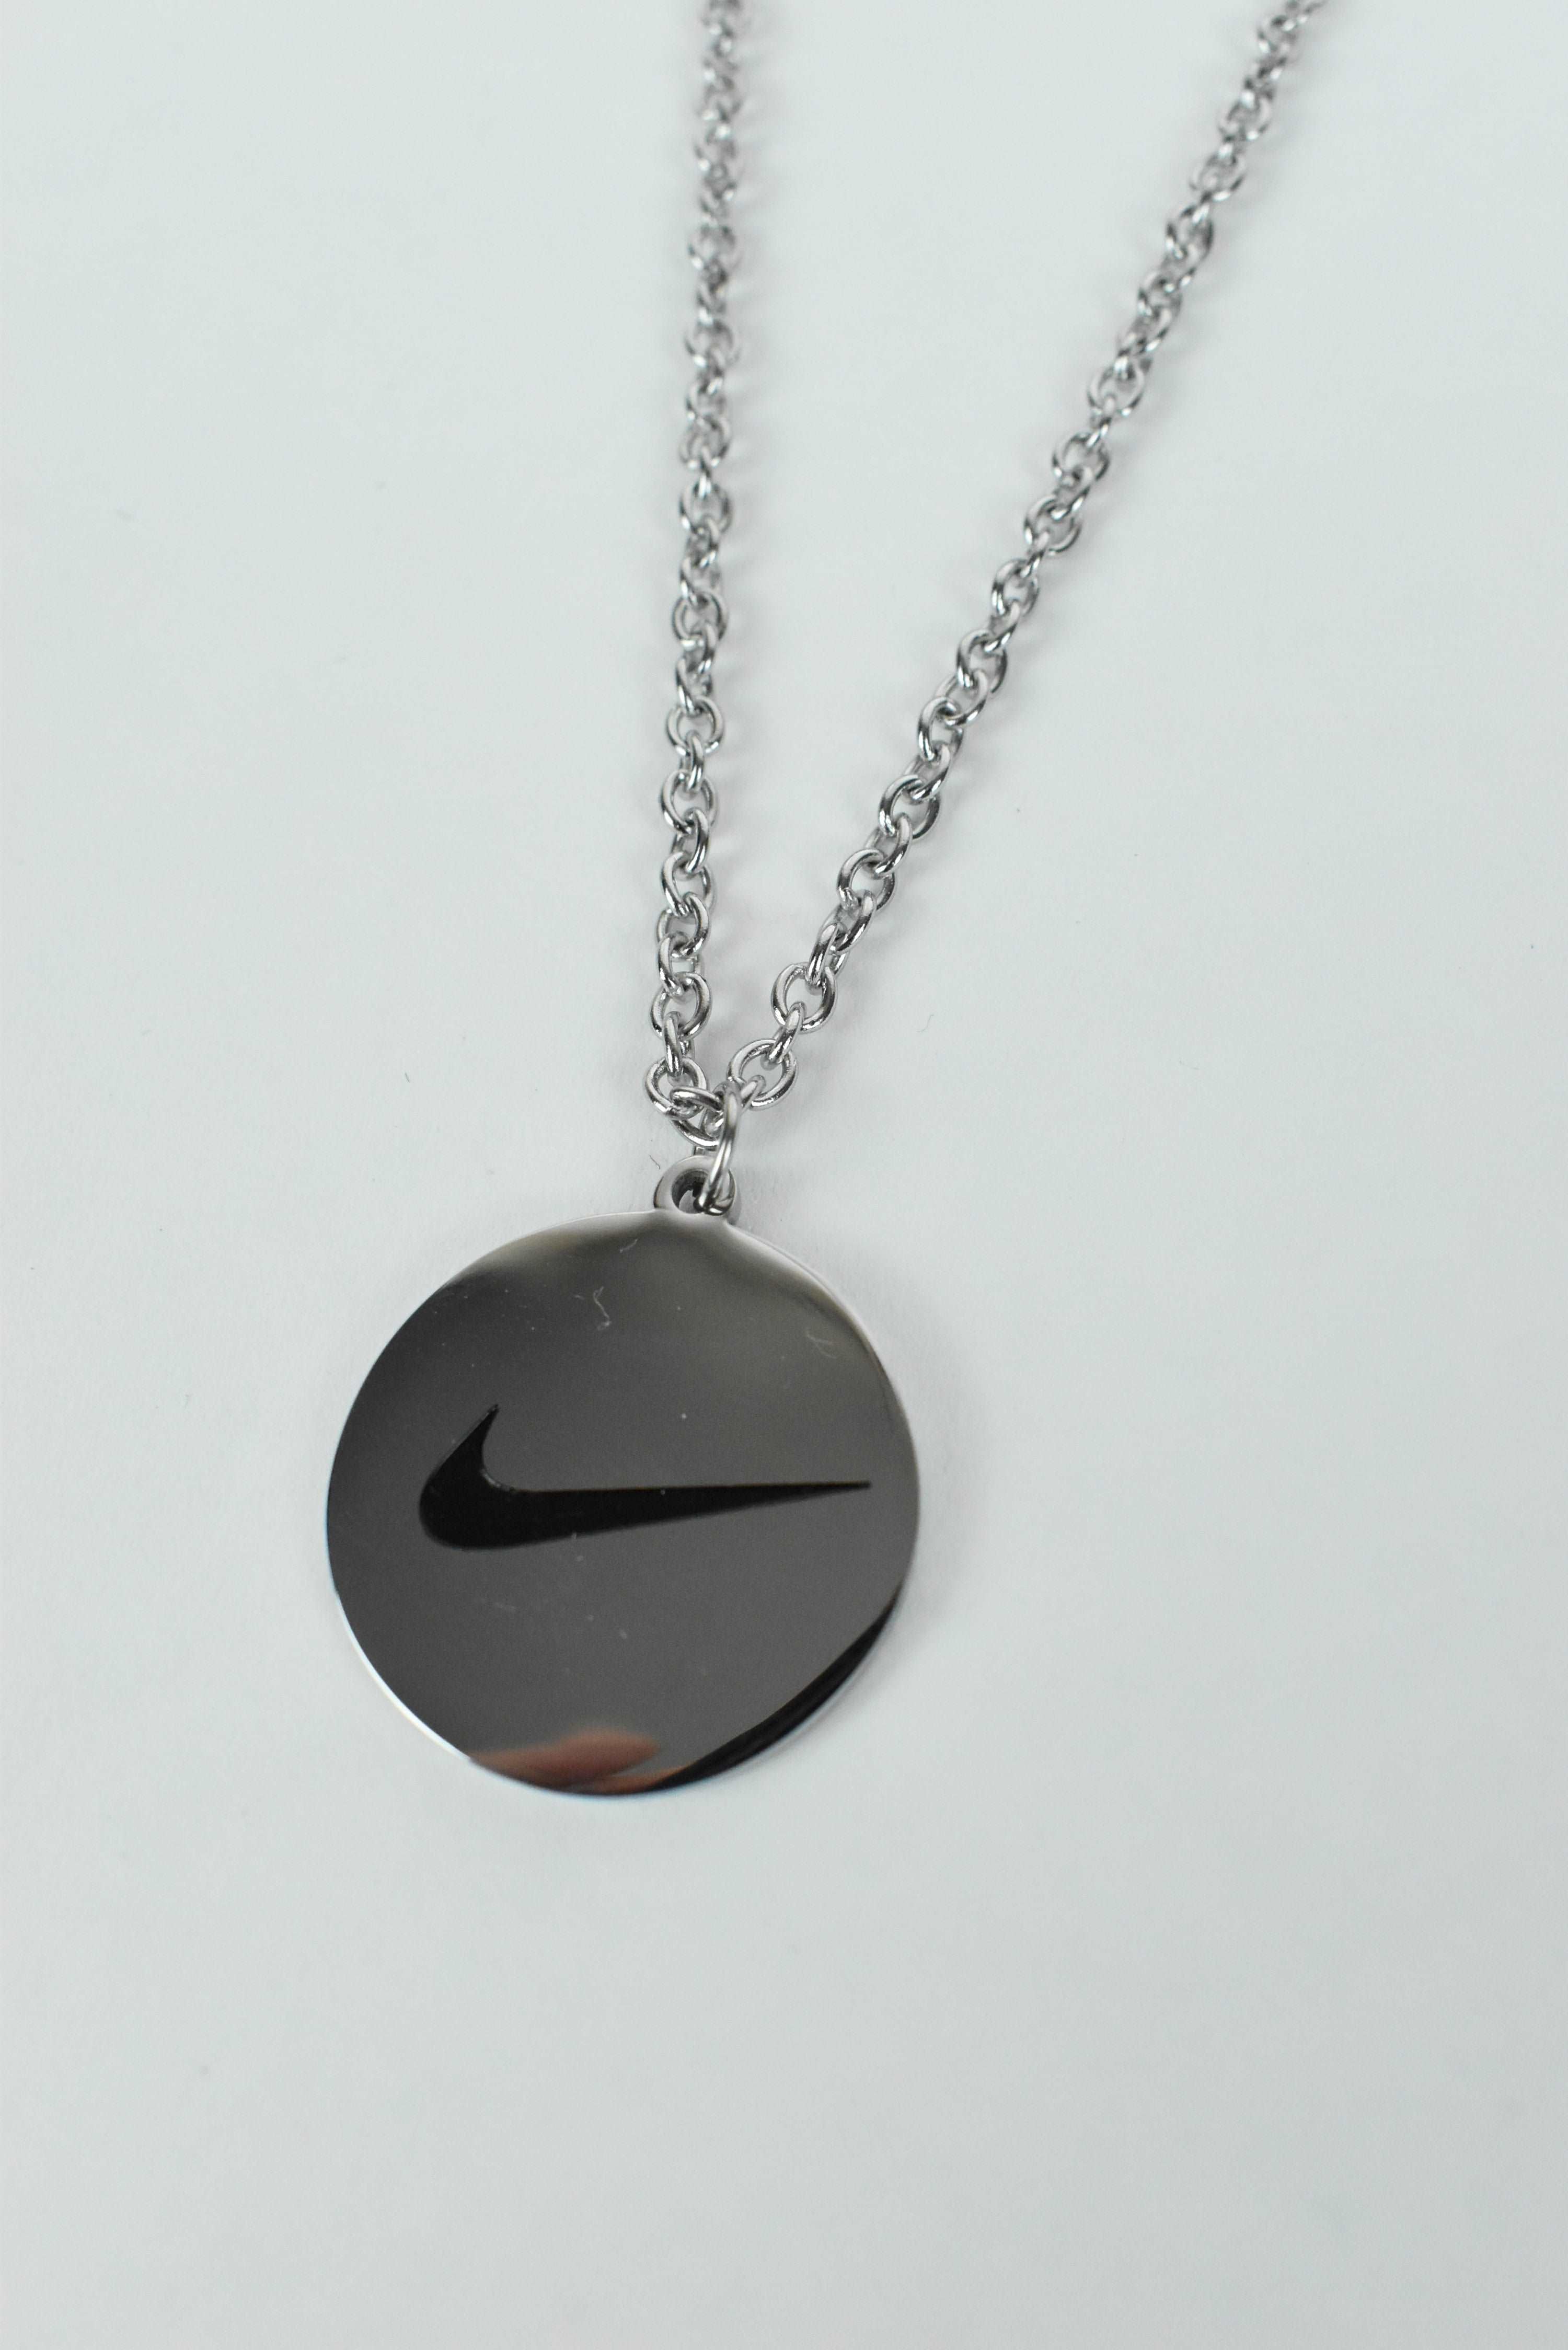 Nike Swoosh Pendent Necklace Bootleg Silver/Gold